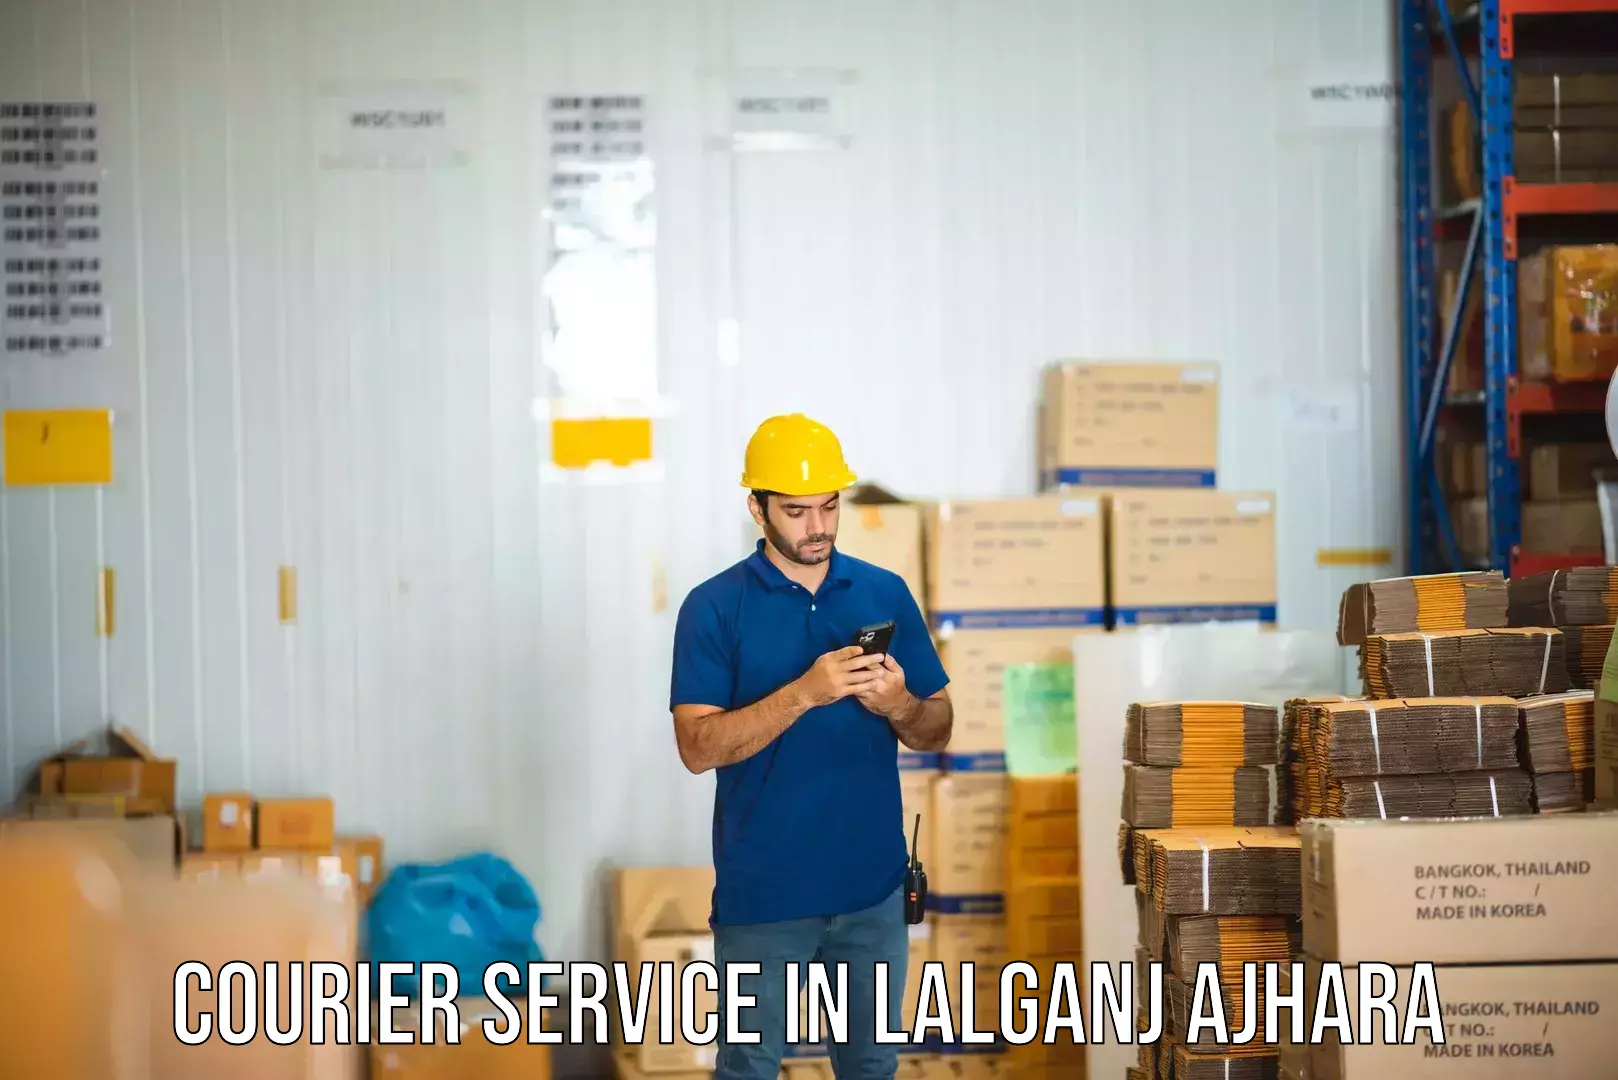 Sustainable shipping practices in Lalganj Ajhara